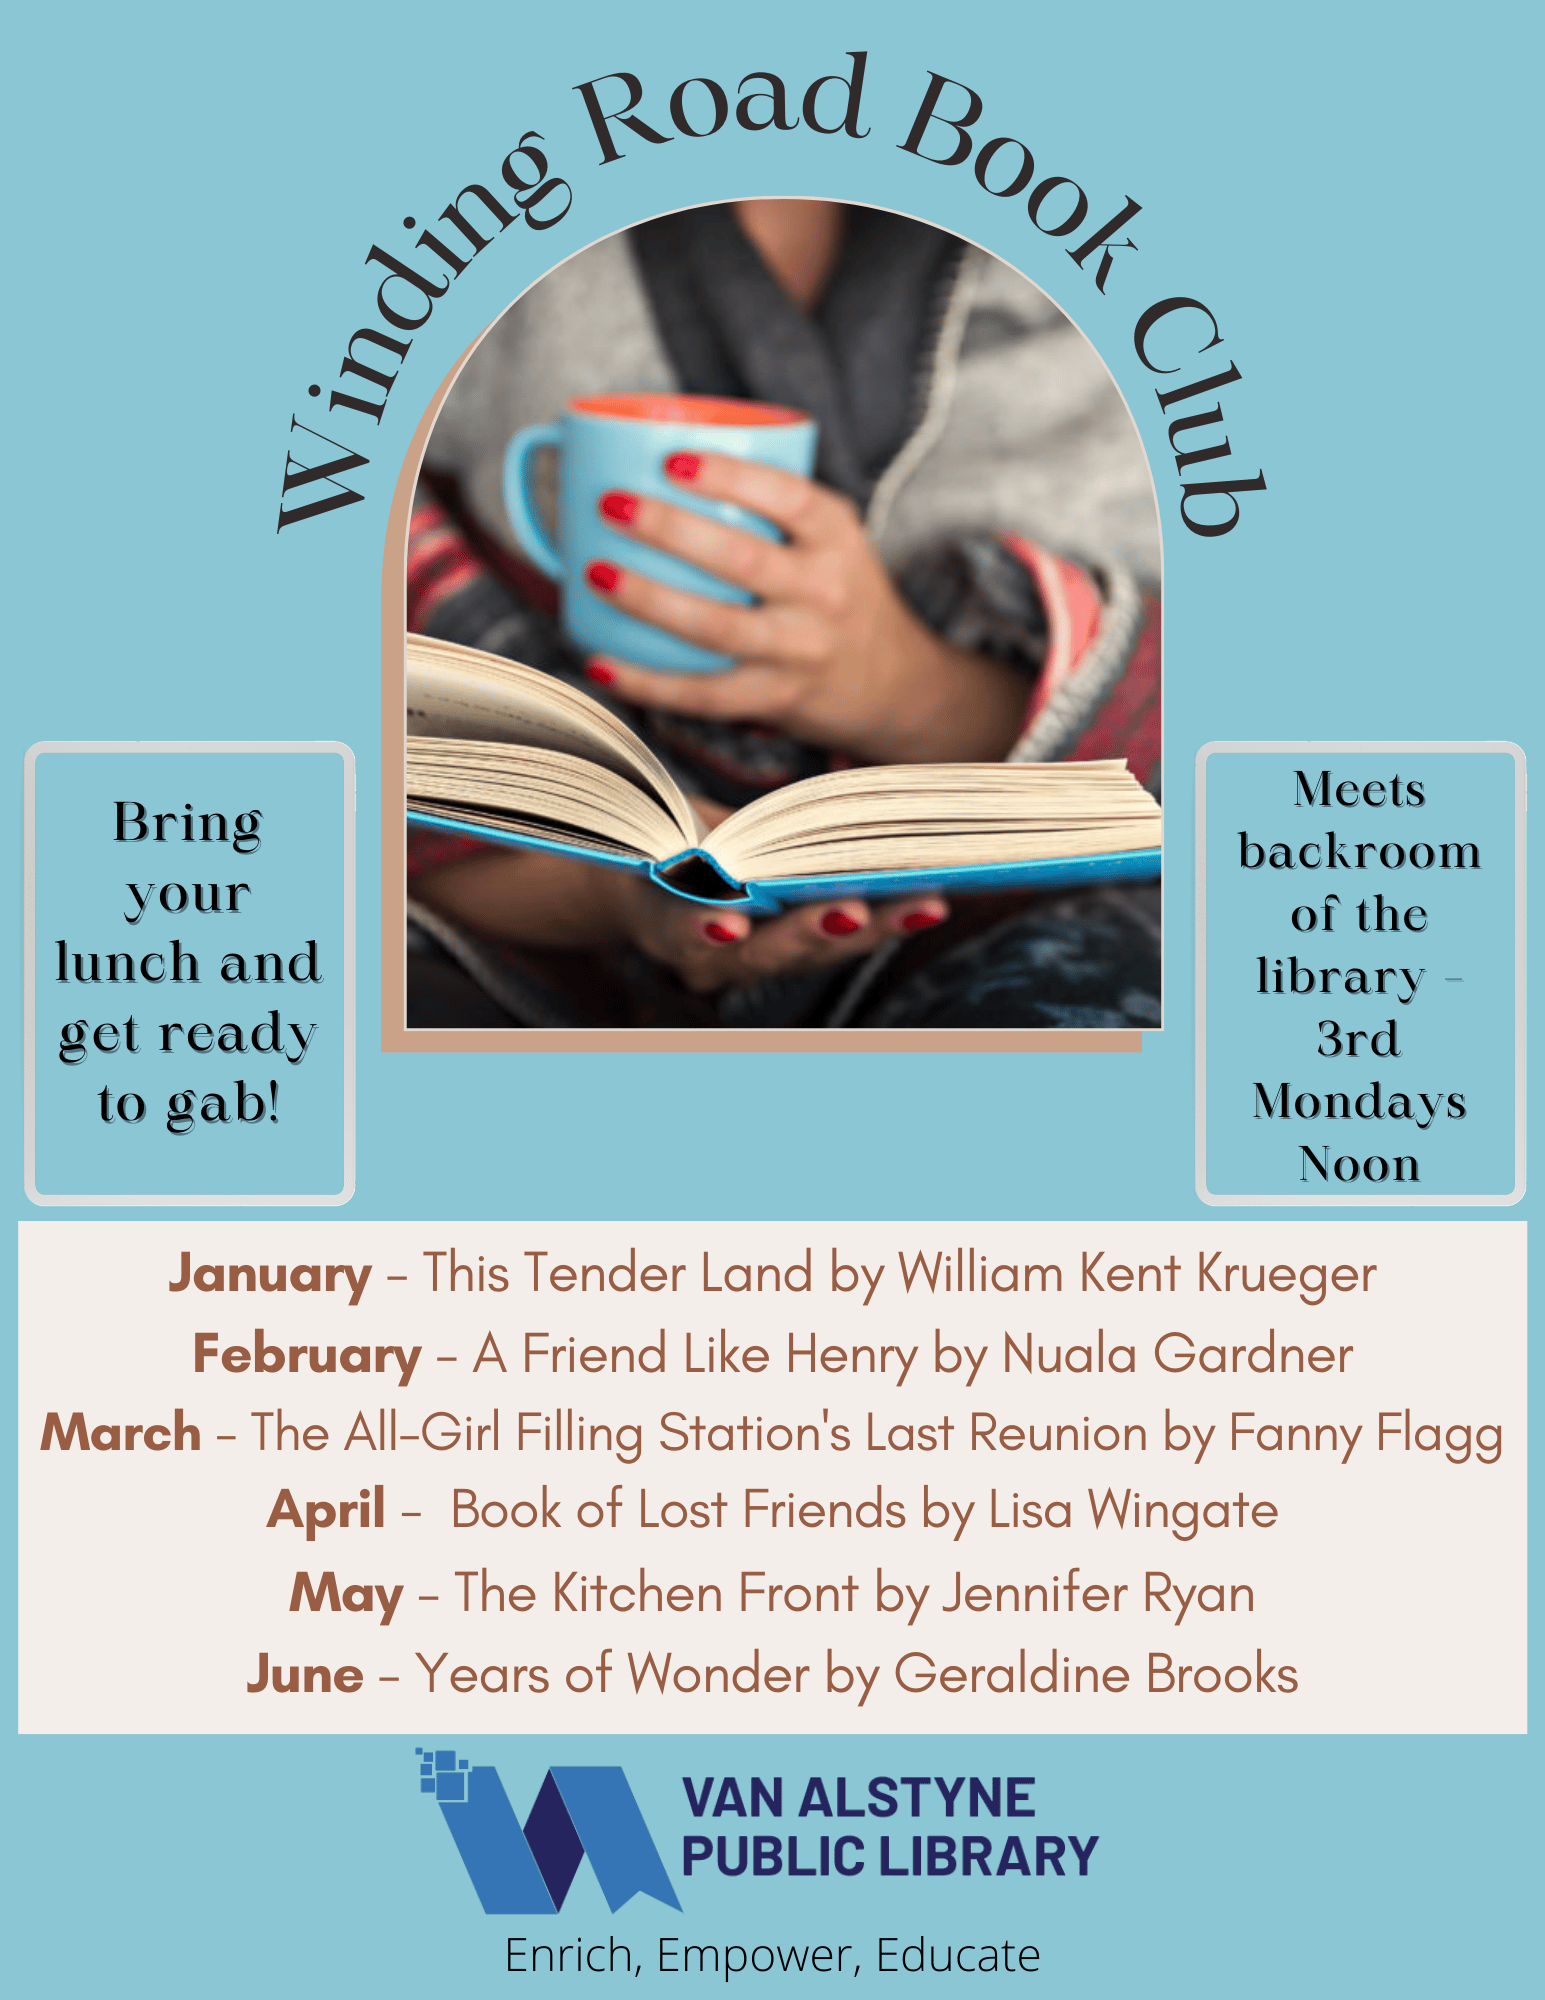 Winding Road Book Club at the Library. 3rd Monday at Noon